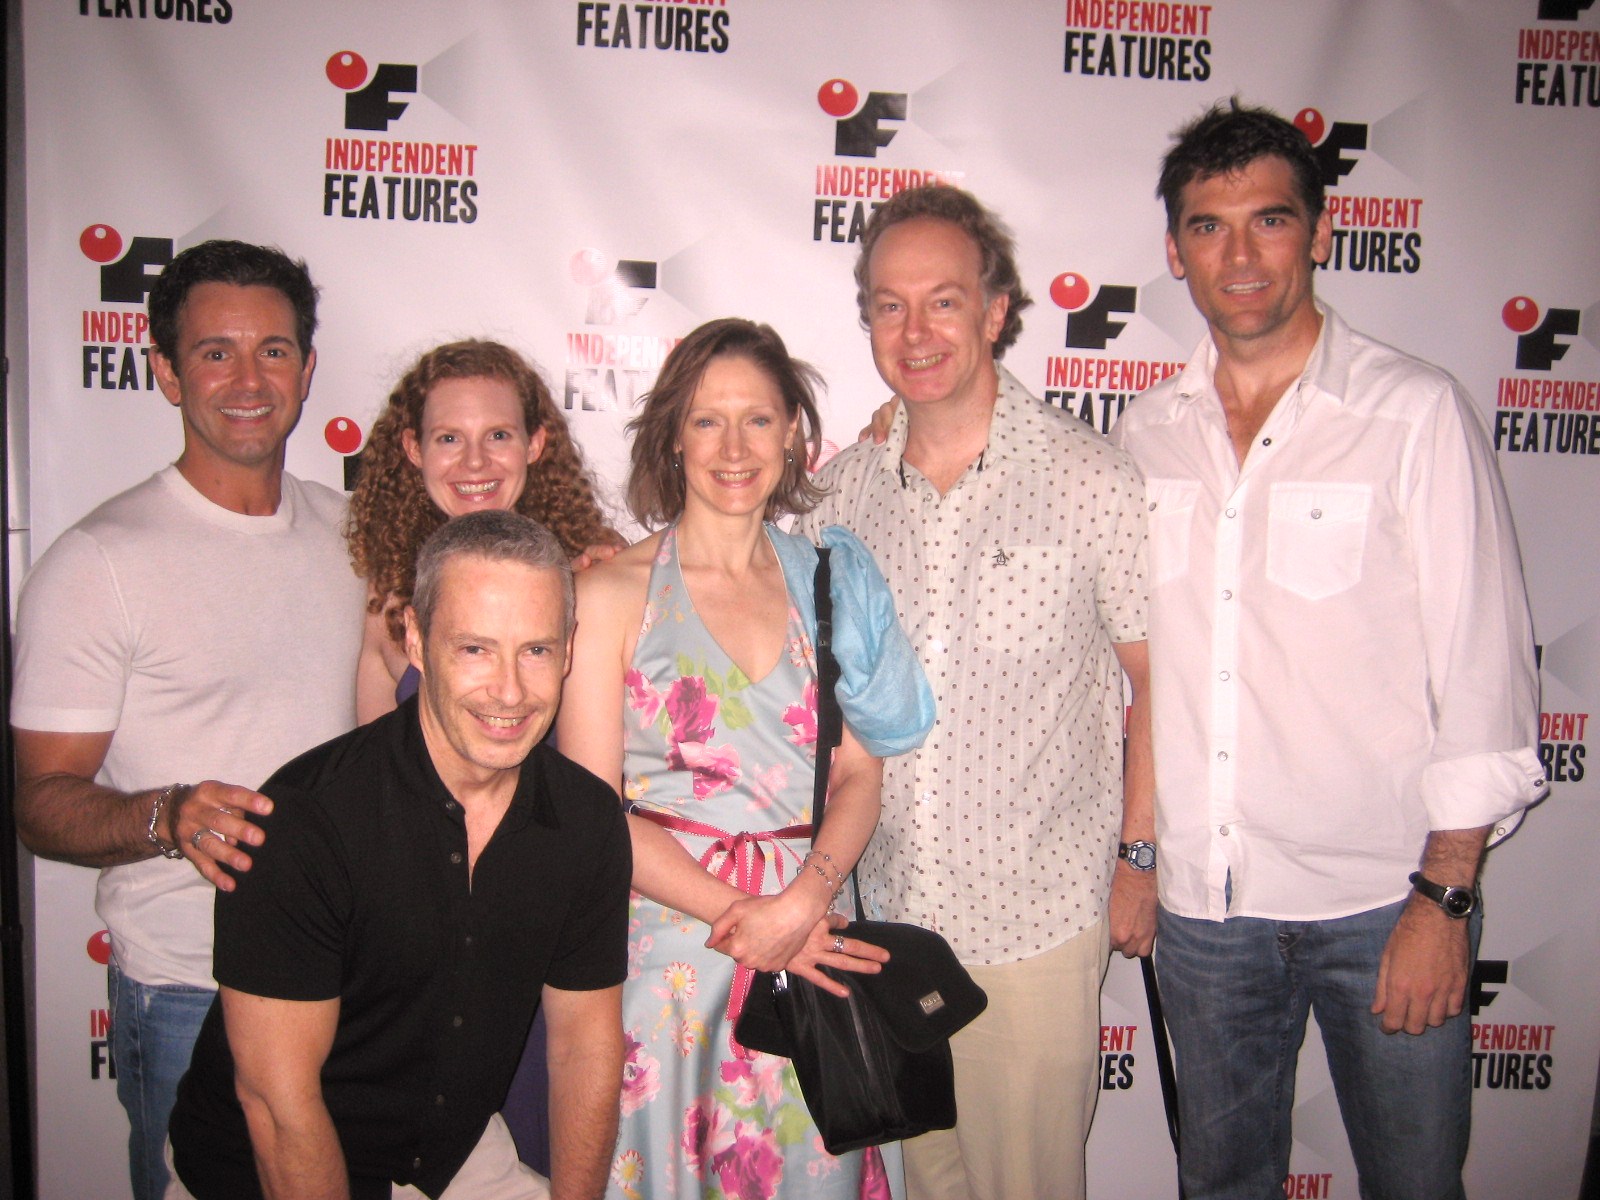 SHOOTING JOHNSON ROEBLING at Tribeca's Independent Features Film Festival Garys posse includes Patrick Boyd, Alisha McKinney, Margaret Burnham, Robert Farrior & Jim Gaylord.